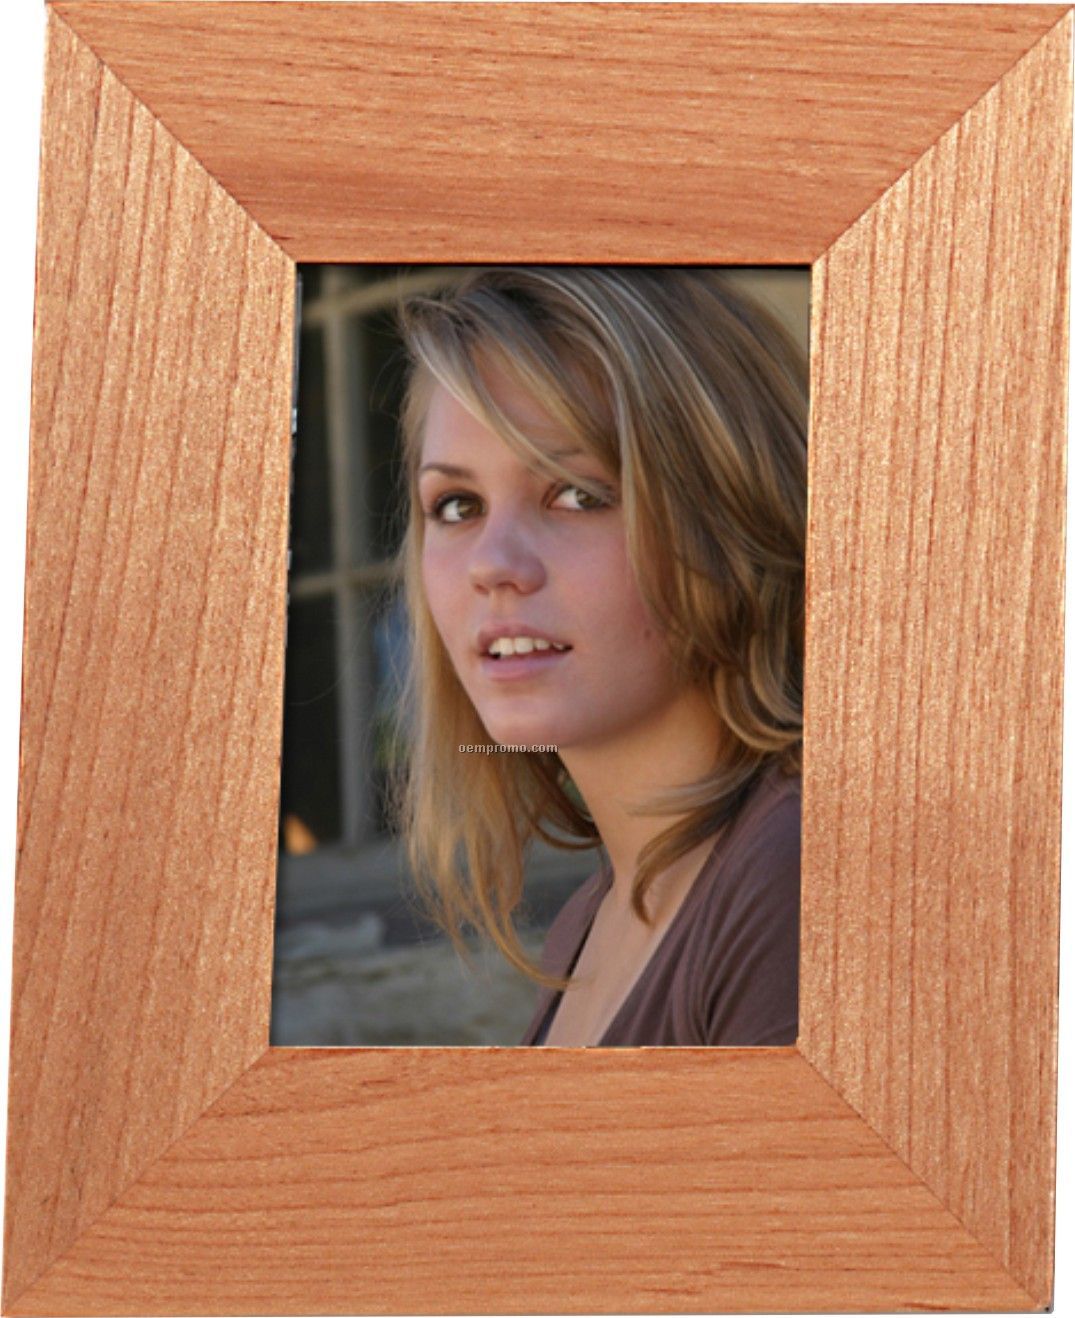 Simple Wood Picture Frame- 3 1/2" X 5" (Wood Grain)